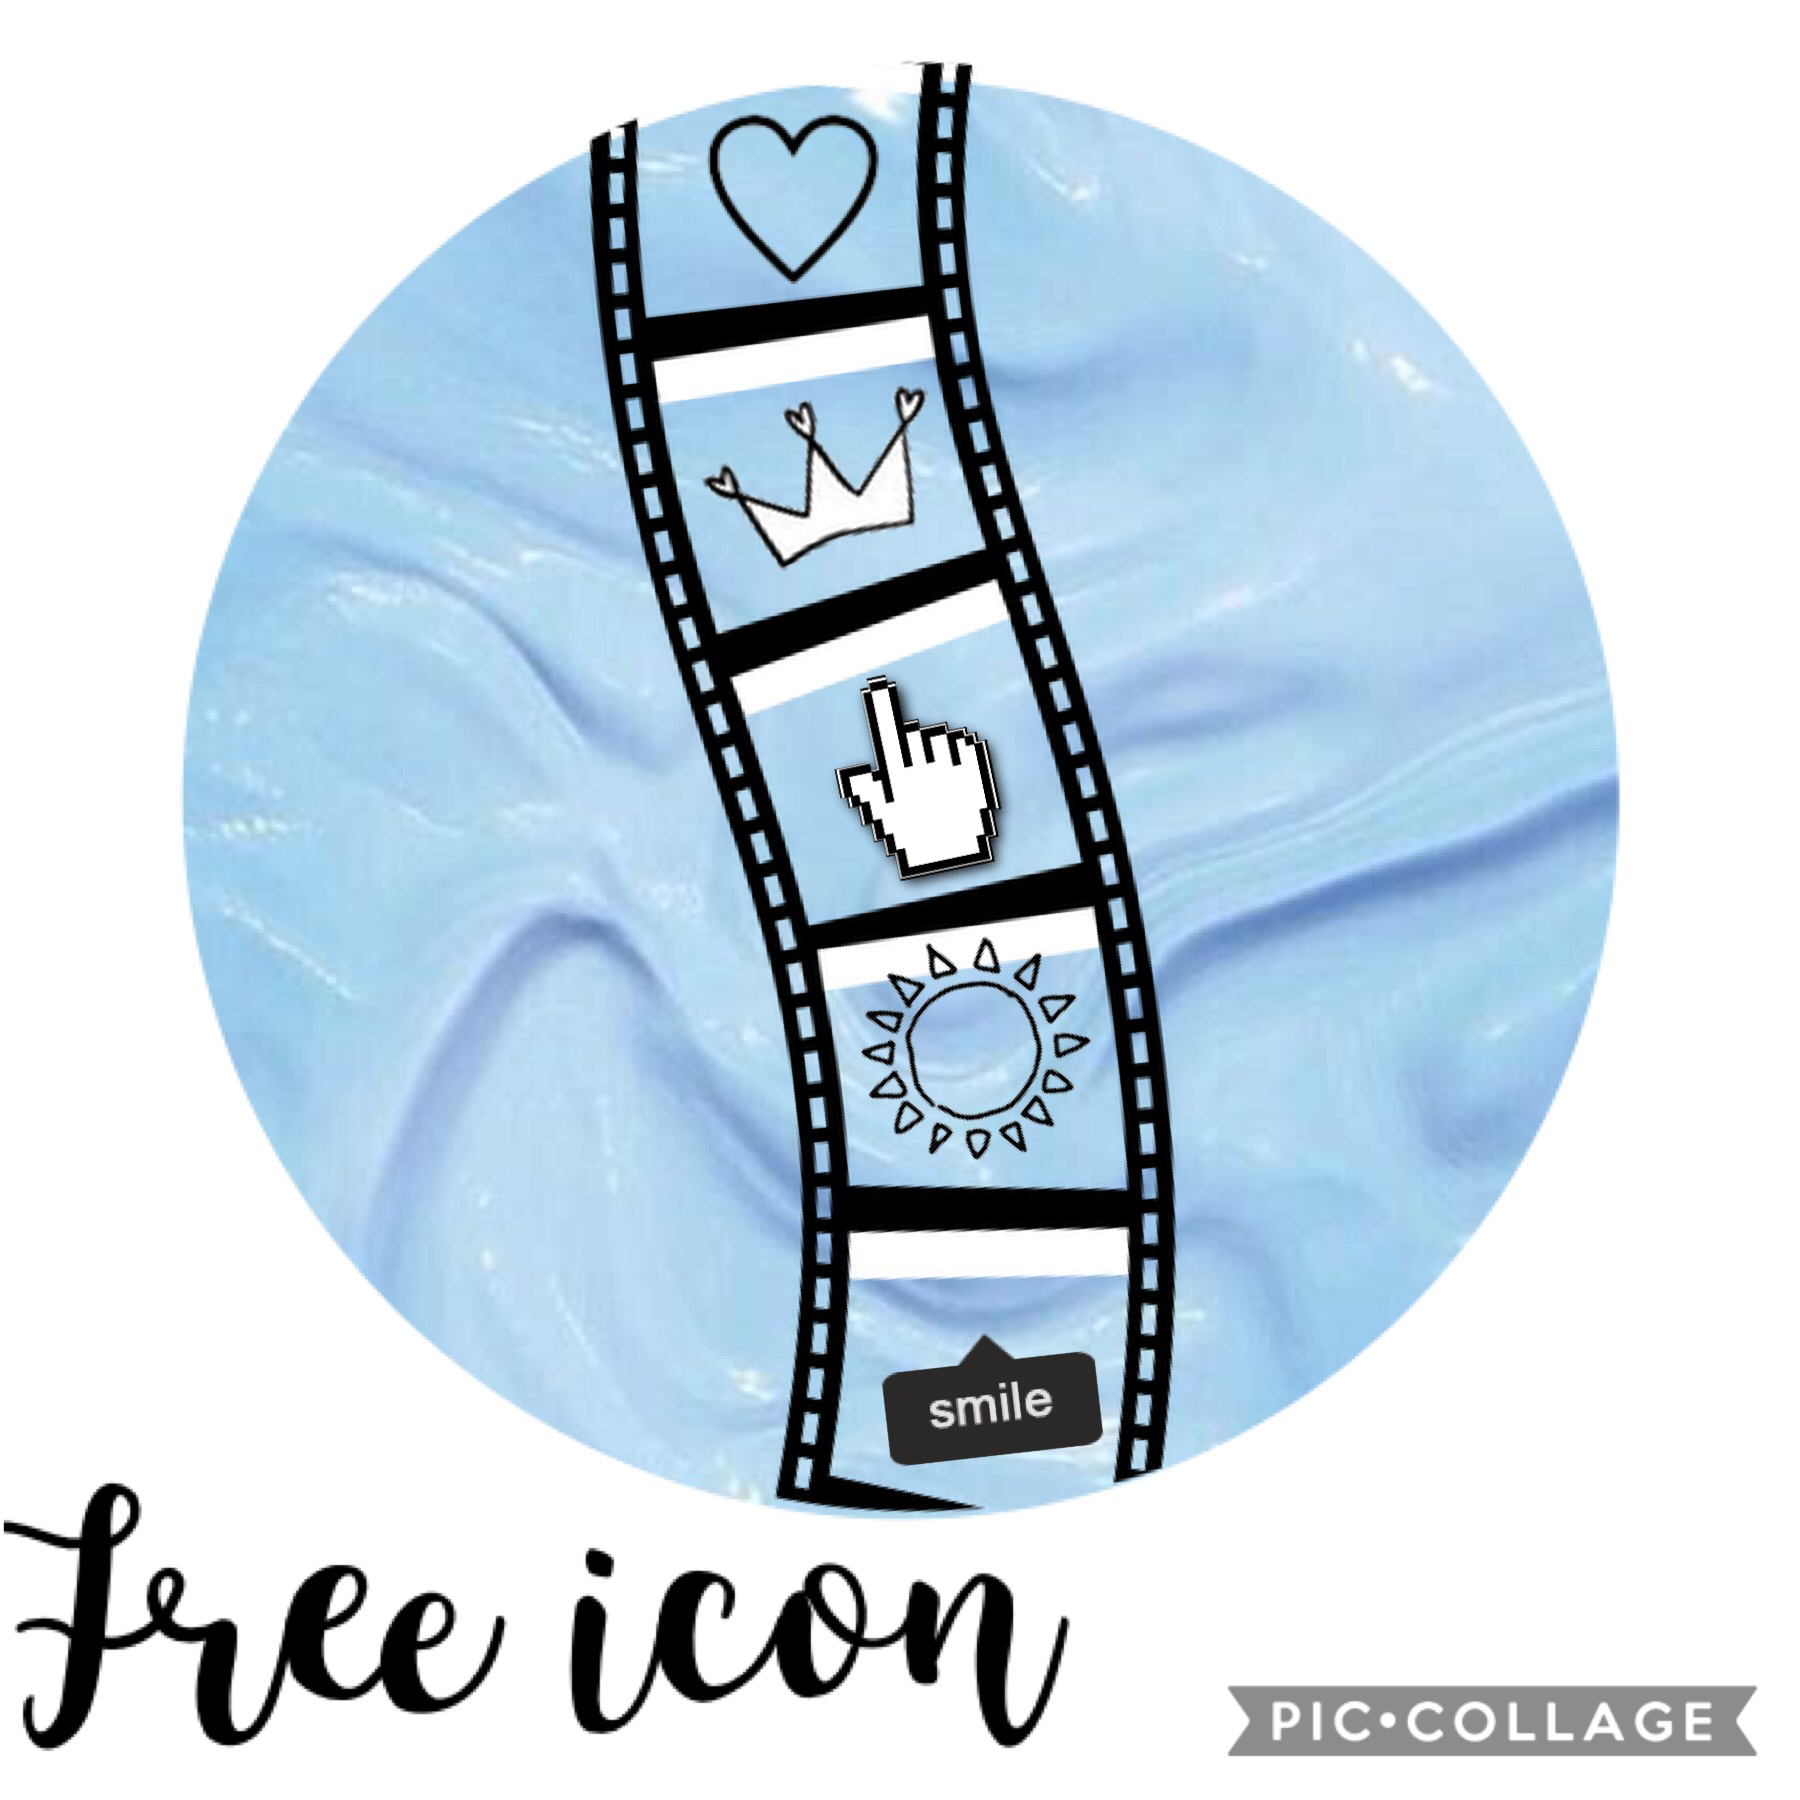 Free icon for anyone to use!